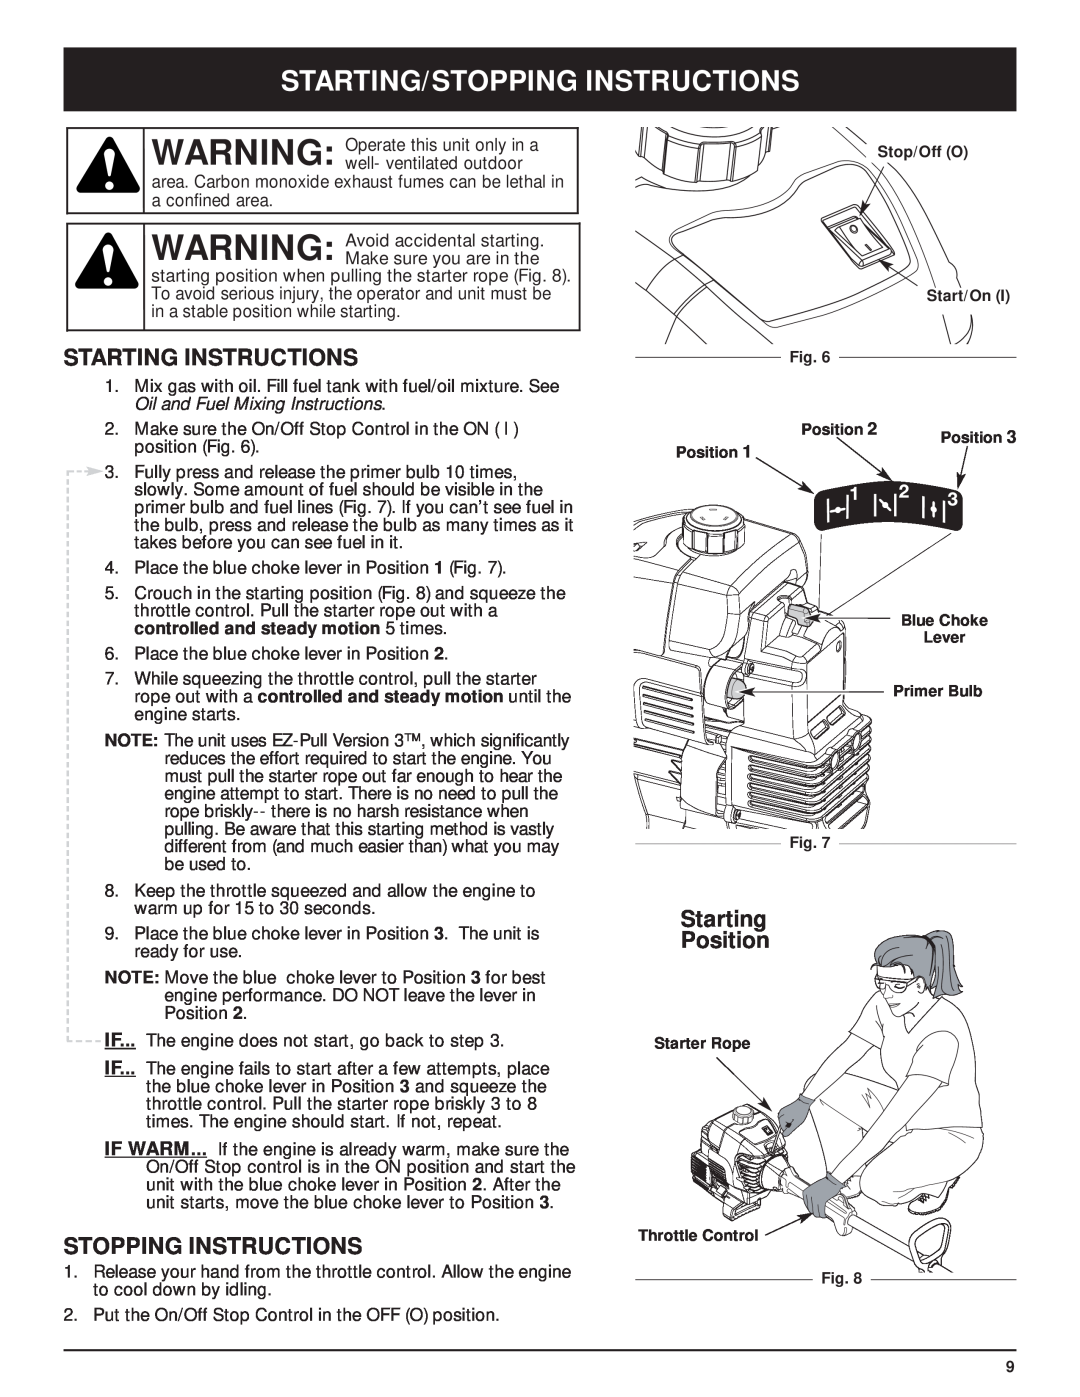 McCulloch MT705 manual Starting/Stopping Instructions, Starting Instructions, Starting Position 